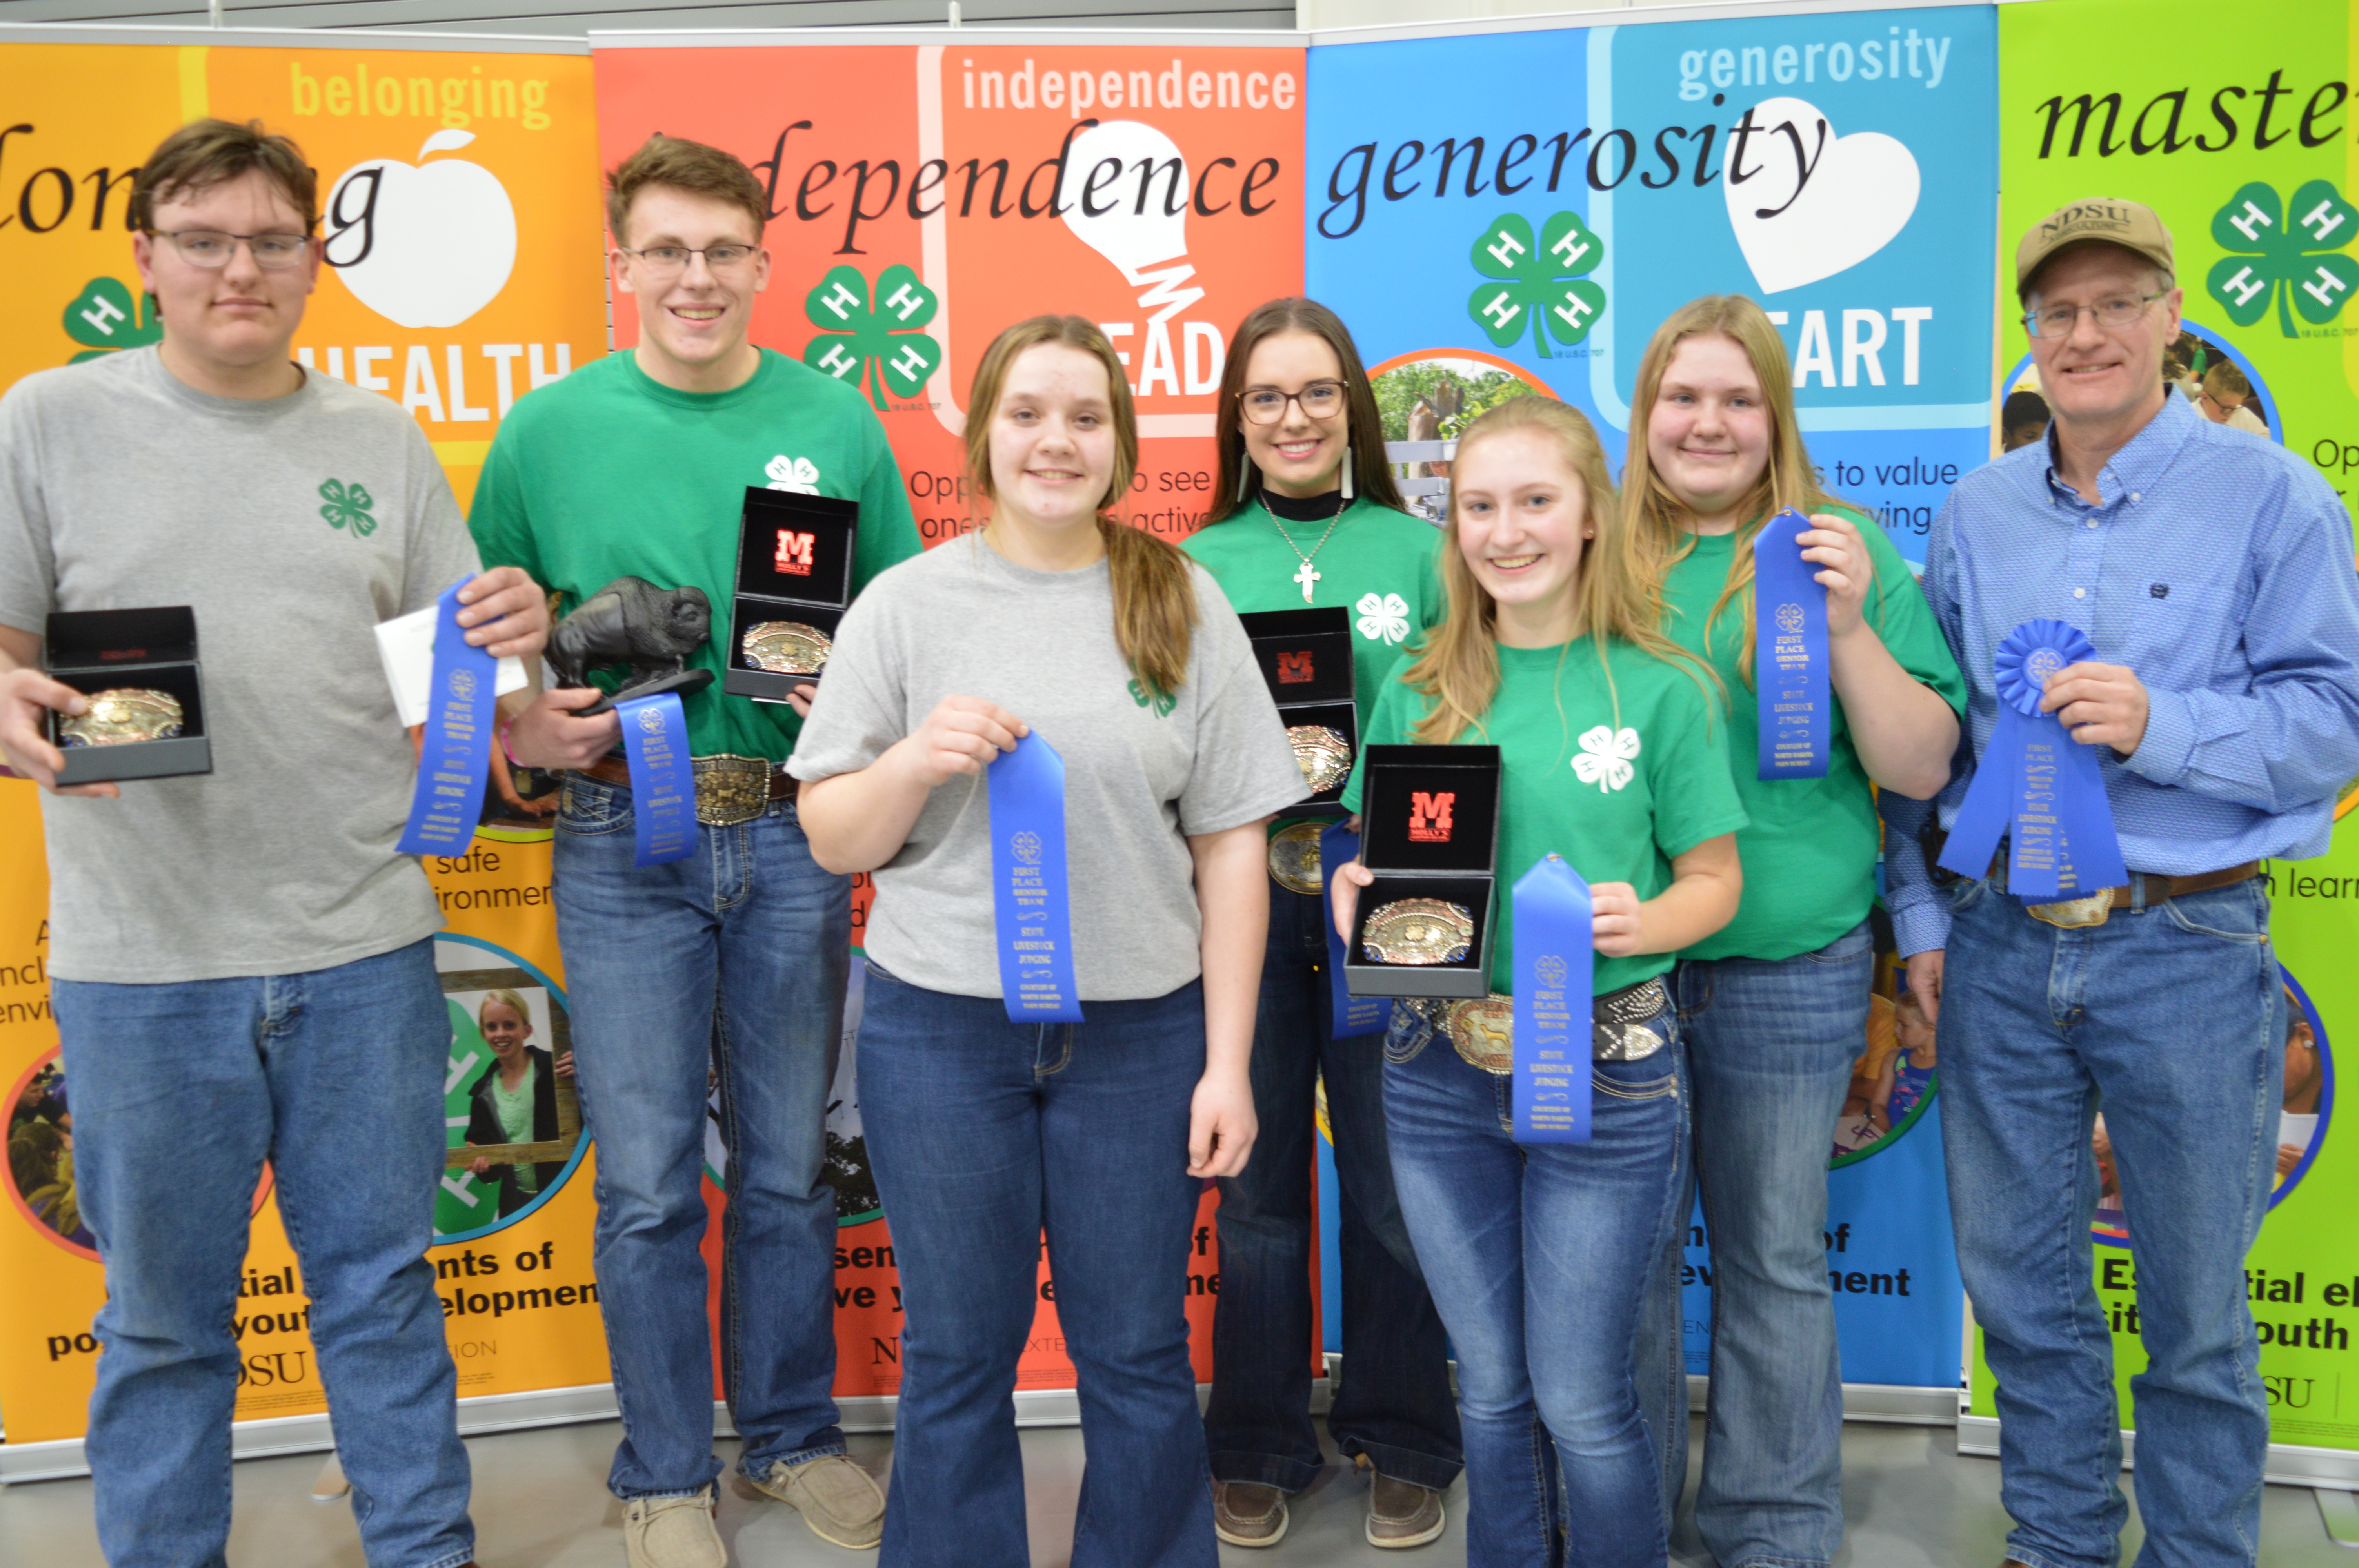 The Oliver County 4-H team took first place in the senior division of the state 4-H livestock judging contest held in Watford City, N.D. Pictured are, from left: Wilton Henke, Jacob Klaudt, Sidney Erickson, Karlee Sailer, Reanna Schmidt, Catie Erickson and coach Rick Schmidt. (NDSU photo)